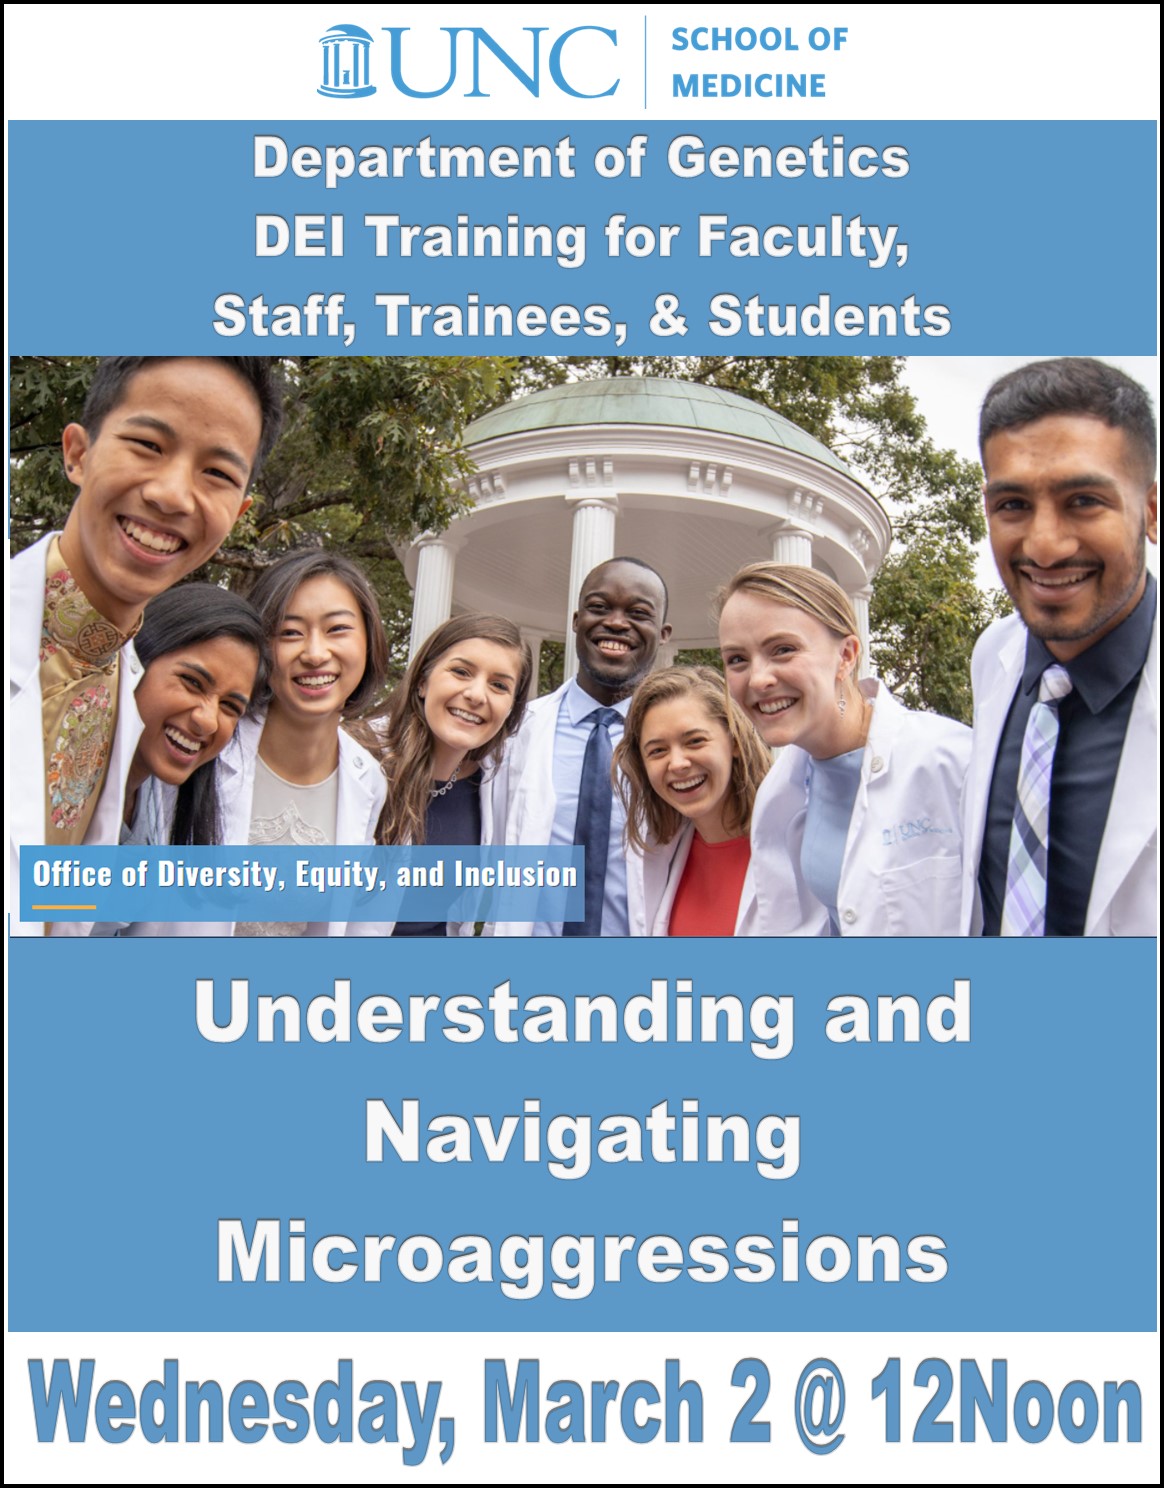 Understanding and Navigating Microagressions